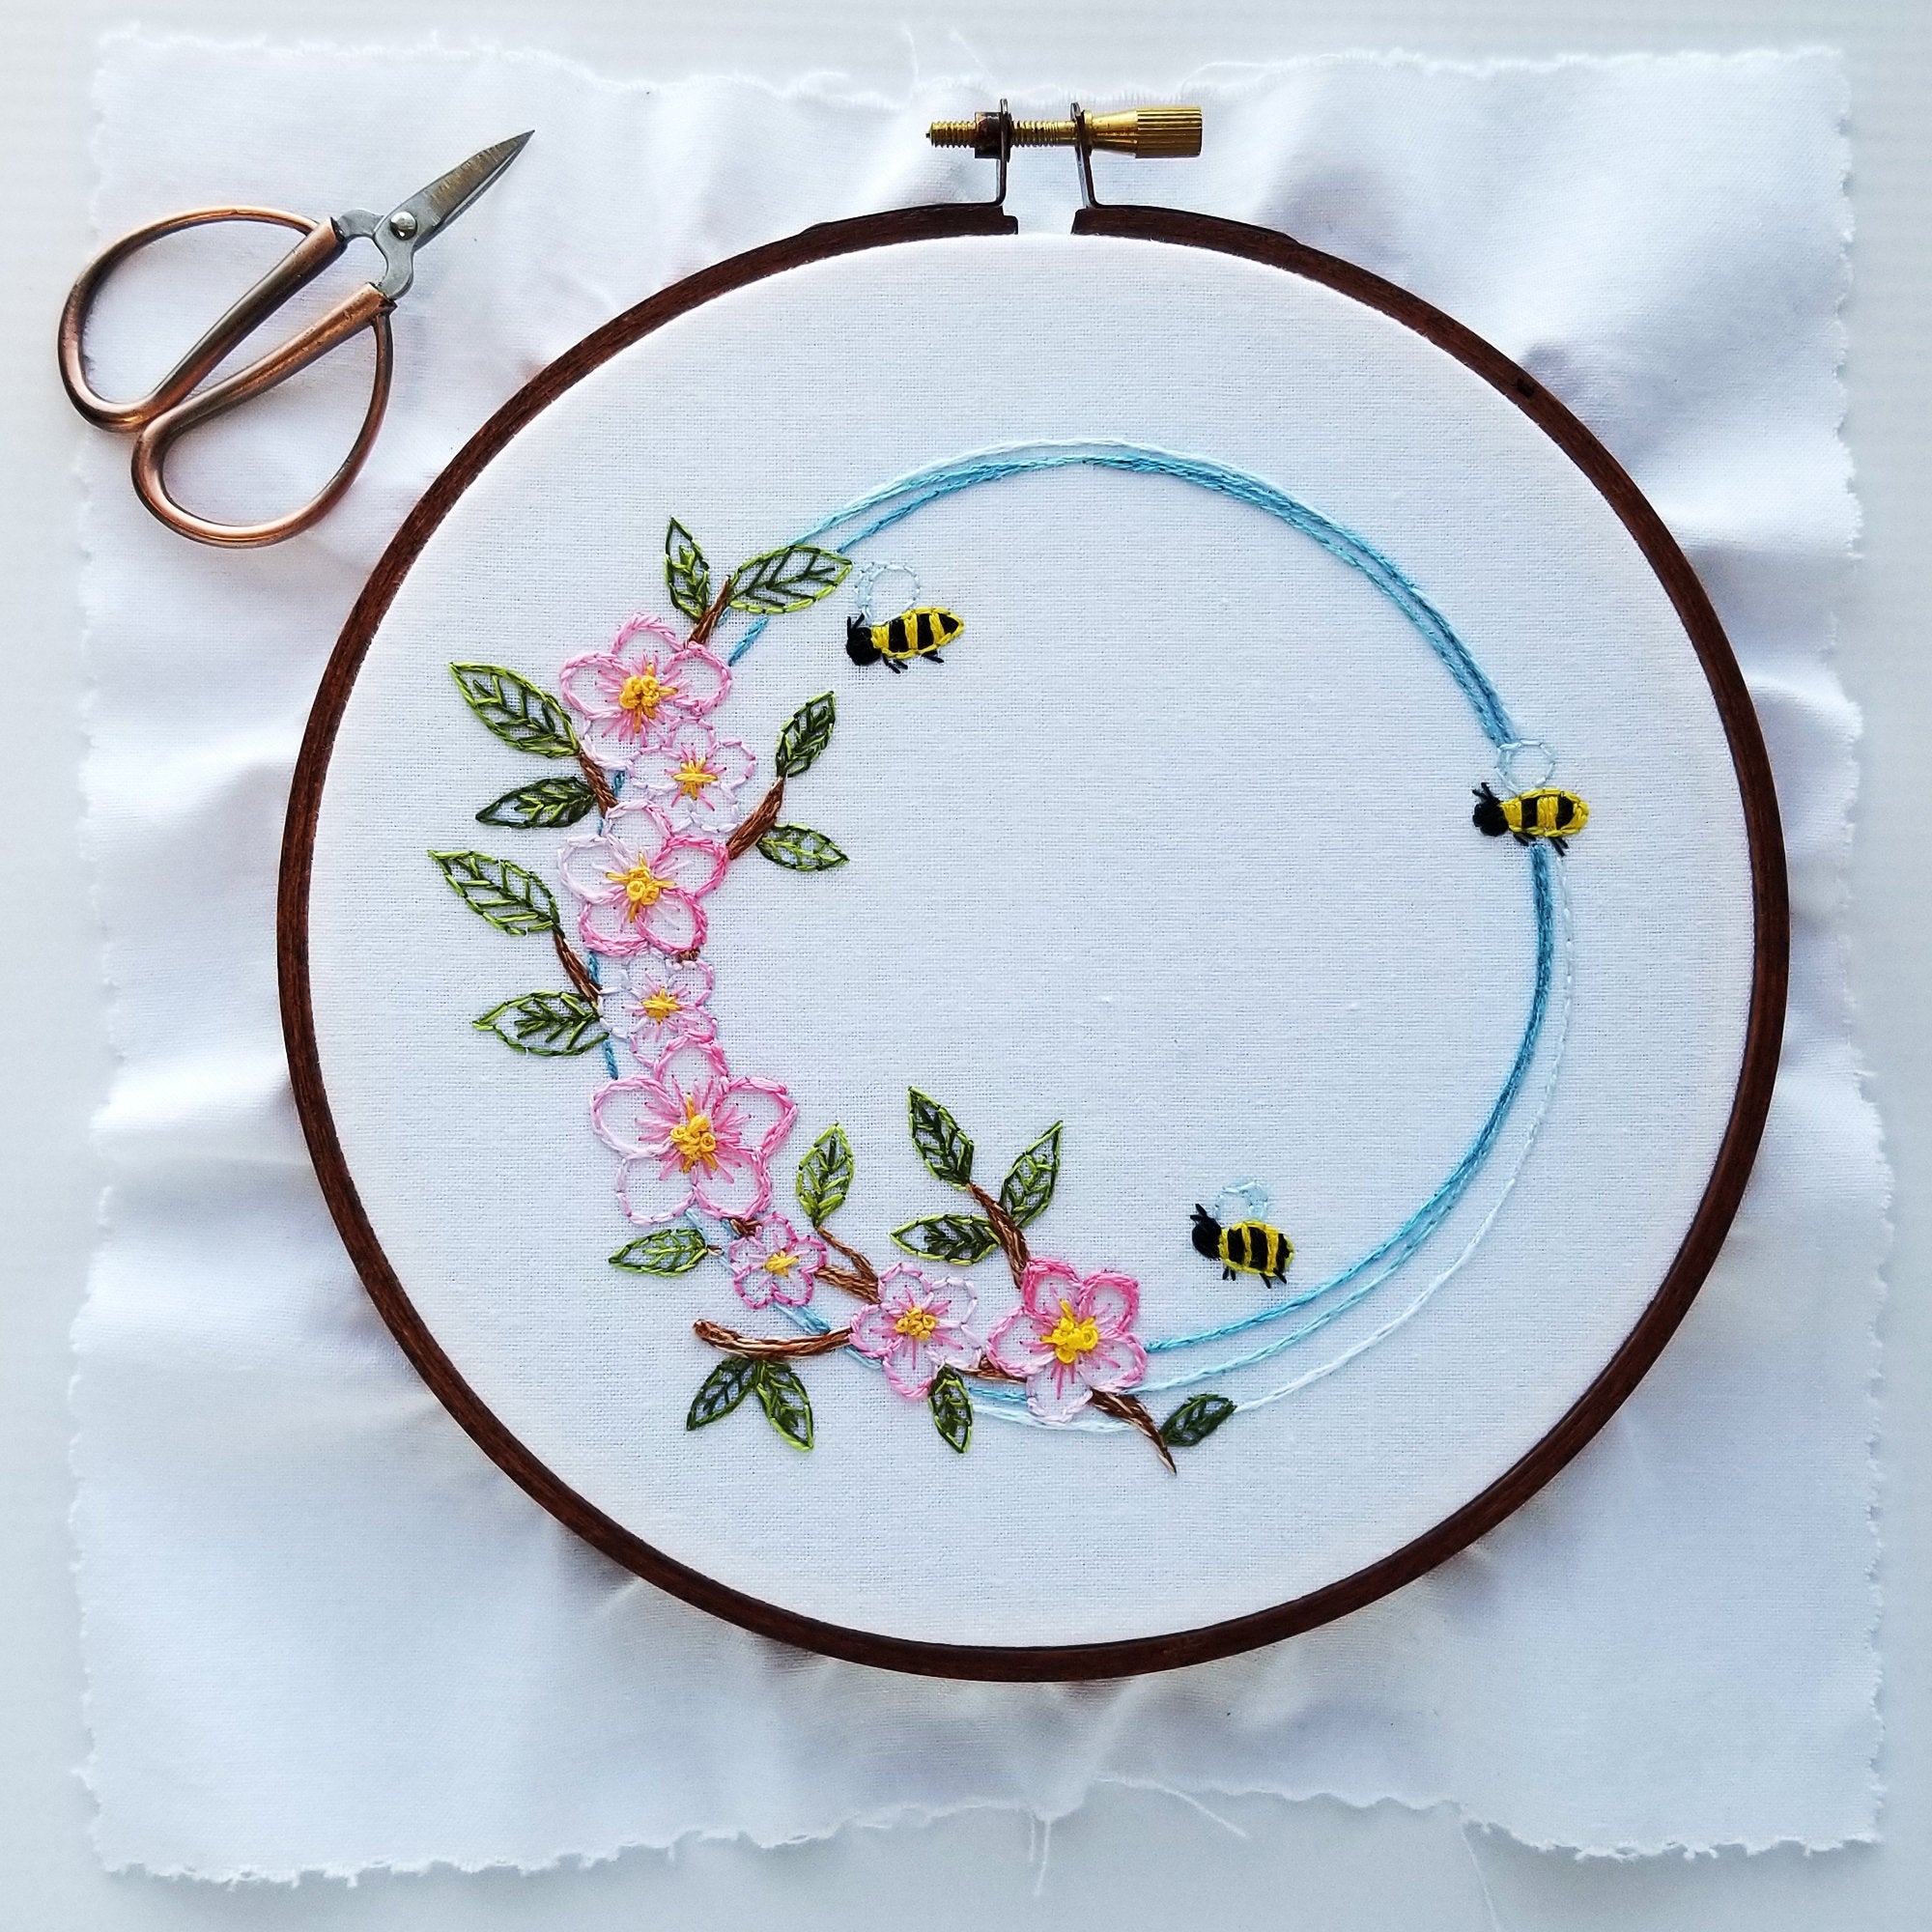 Kit - Apple Blossoms & Honey Bees Hand Embroidery Kit - Beginner Embroidery Kit with Printed Fabric